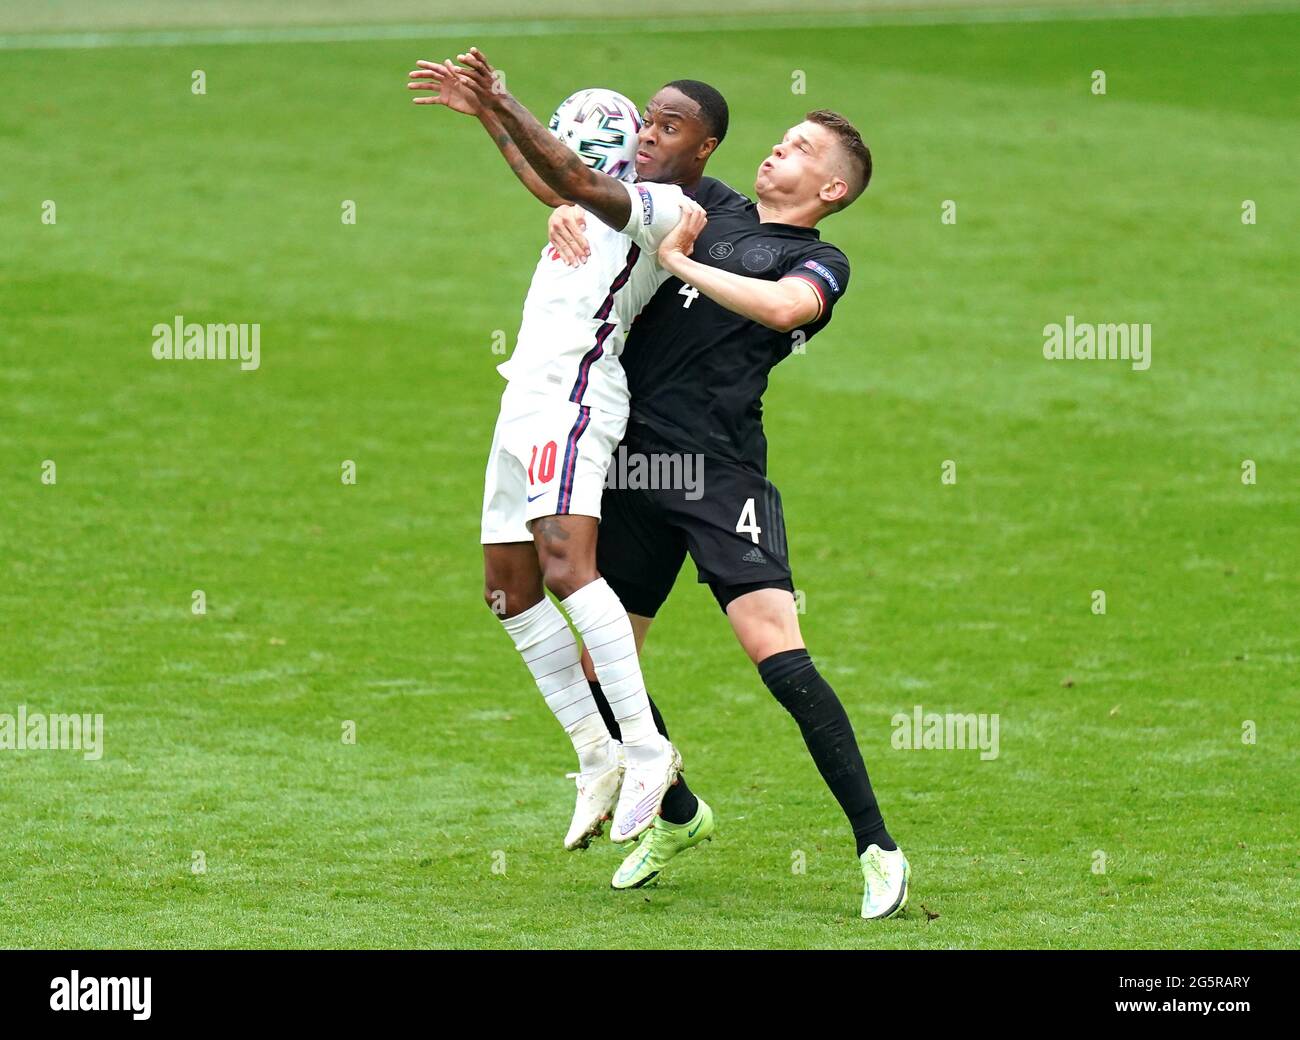 England's Raheem Sterling (left) and Germany's Matthias Ginter battle for the ball during the UEFA Euro 2020 round of 16 match at Wembley Stadium, London. Picture date: Tuesday June 29, 2021. Stock Photo